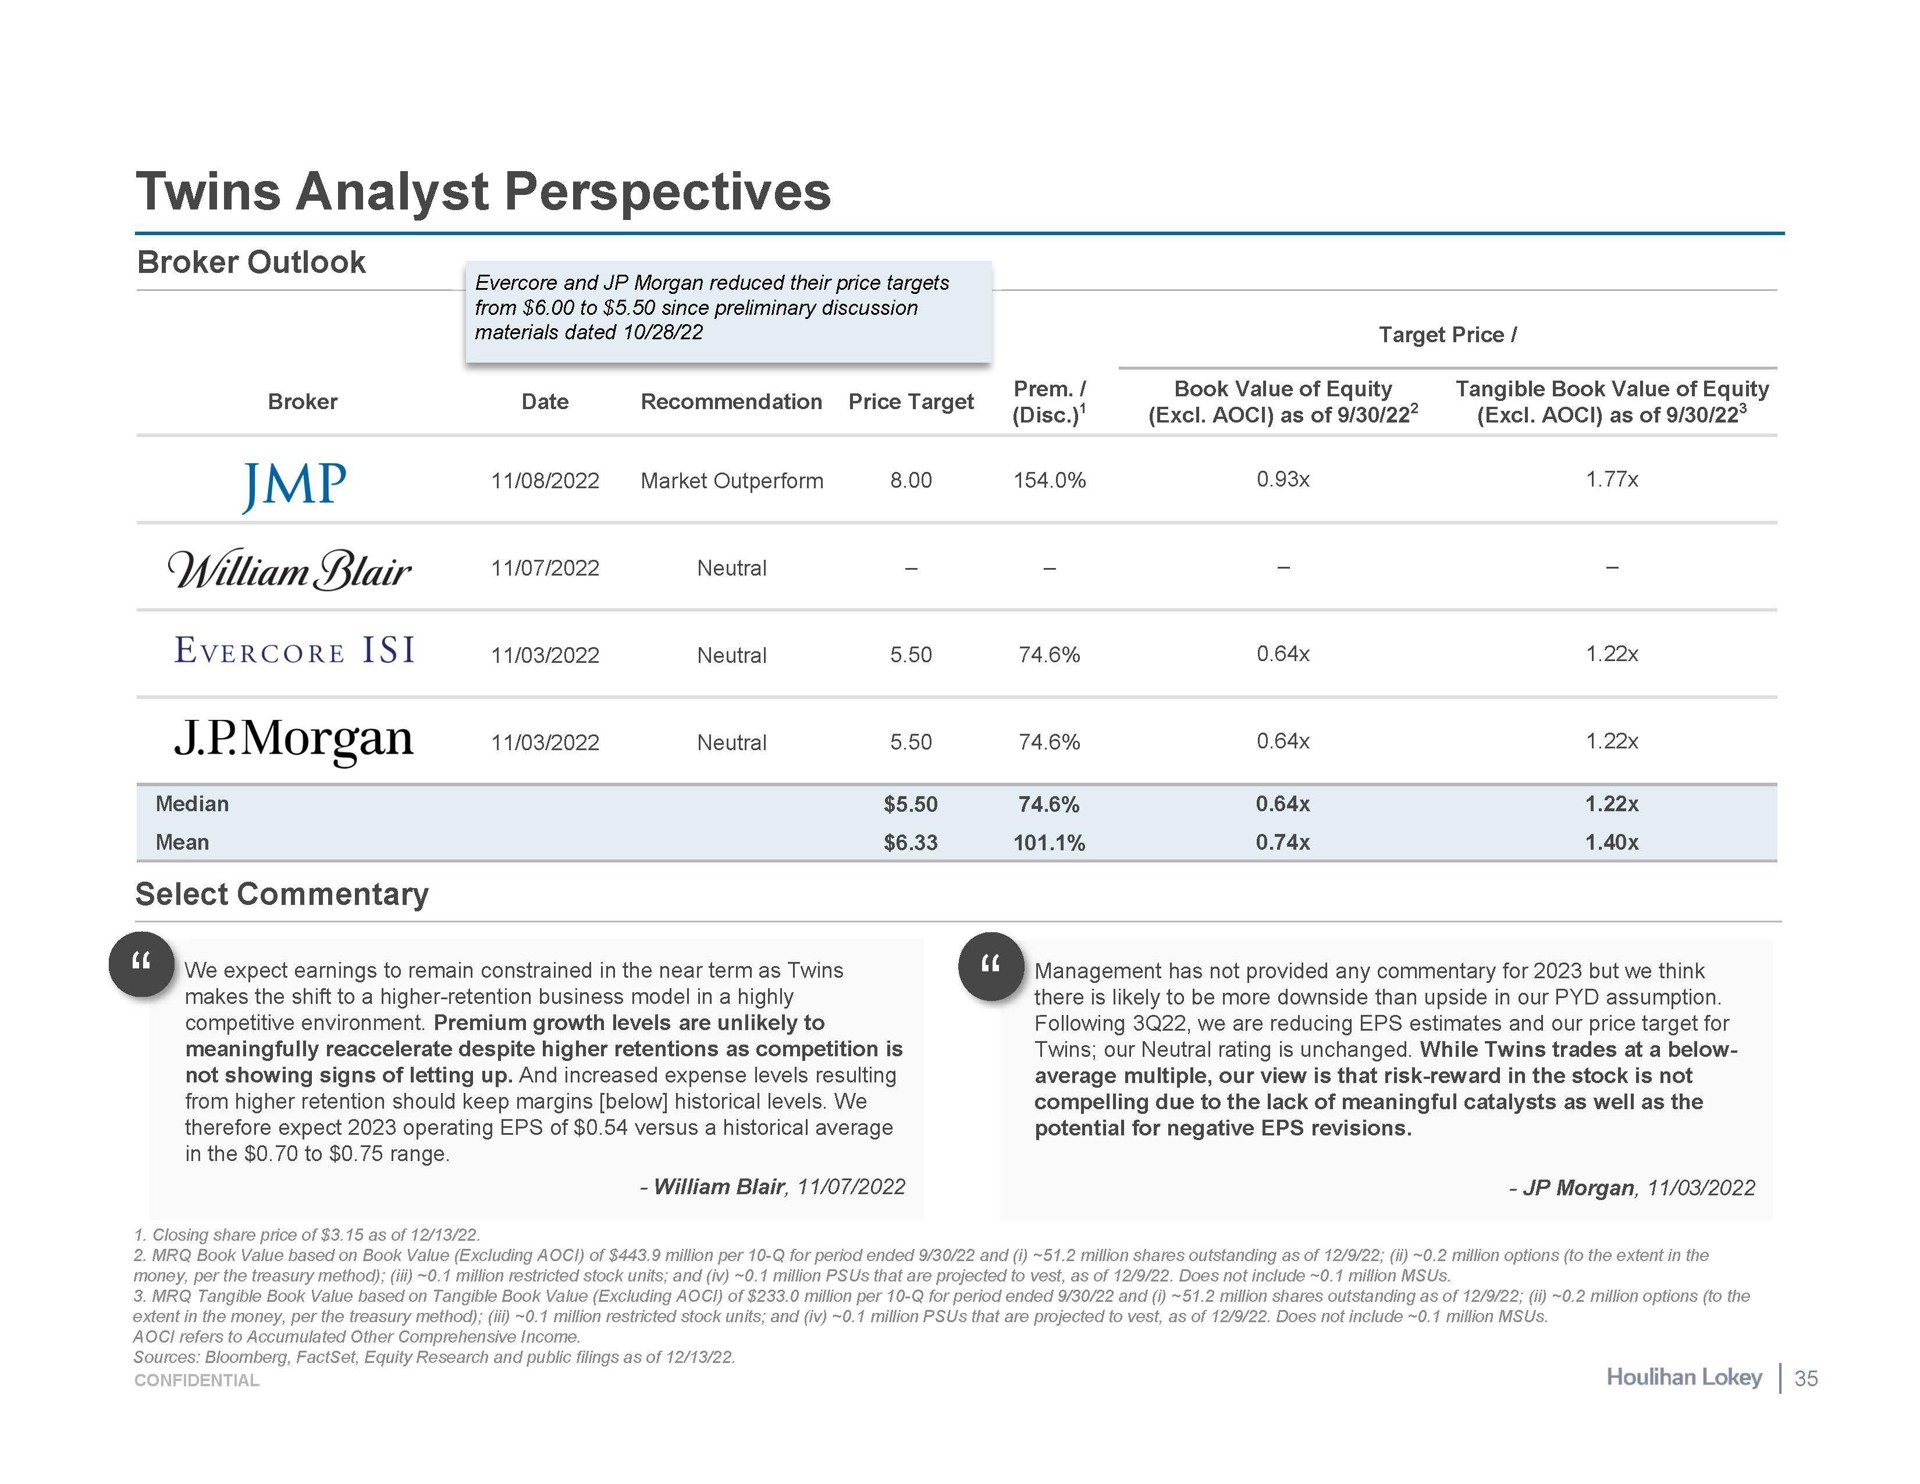 twins analyst perspectives broker outlook broker market outperform date recommendation price target nice as of as of lair neutral neutral morgan neutral select commentary | Houlihan Lokey